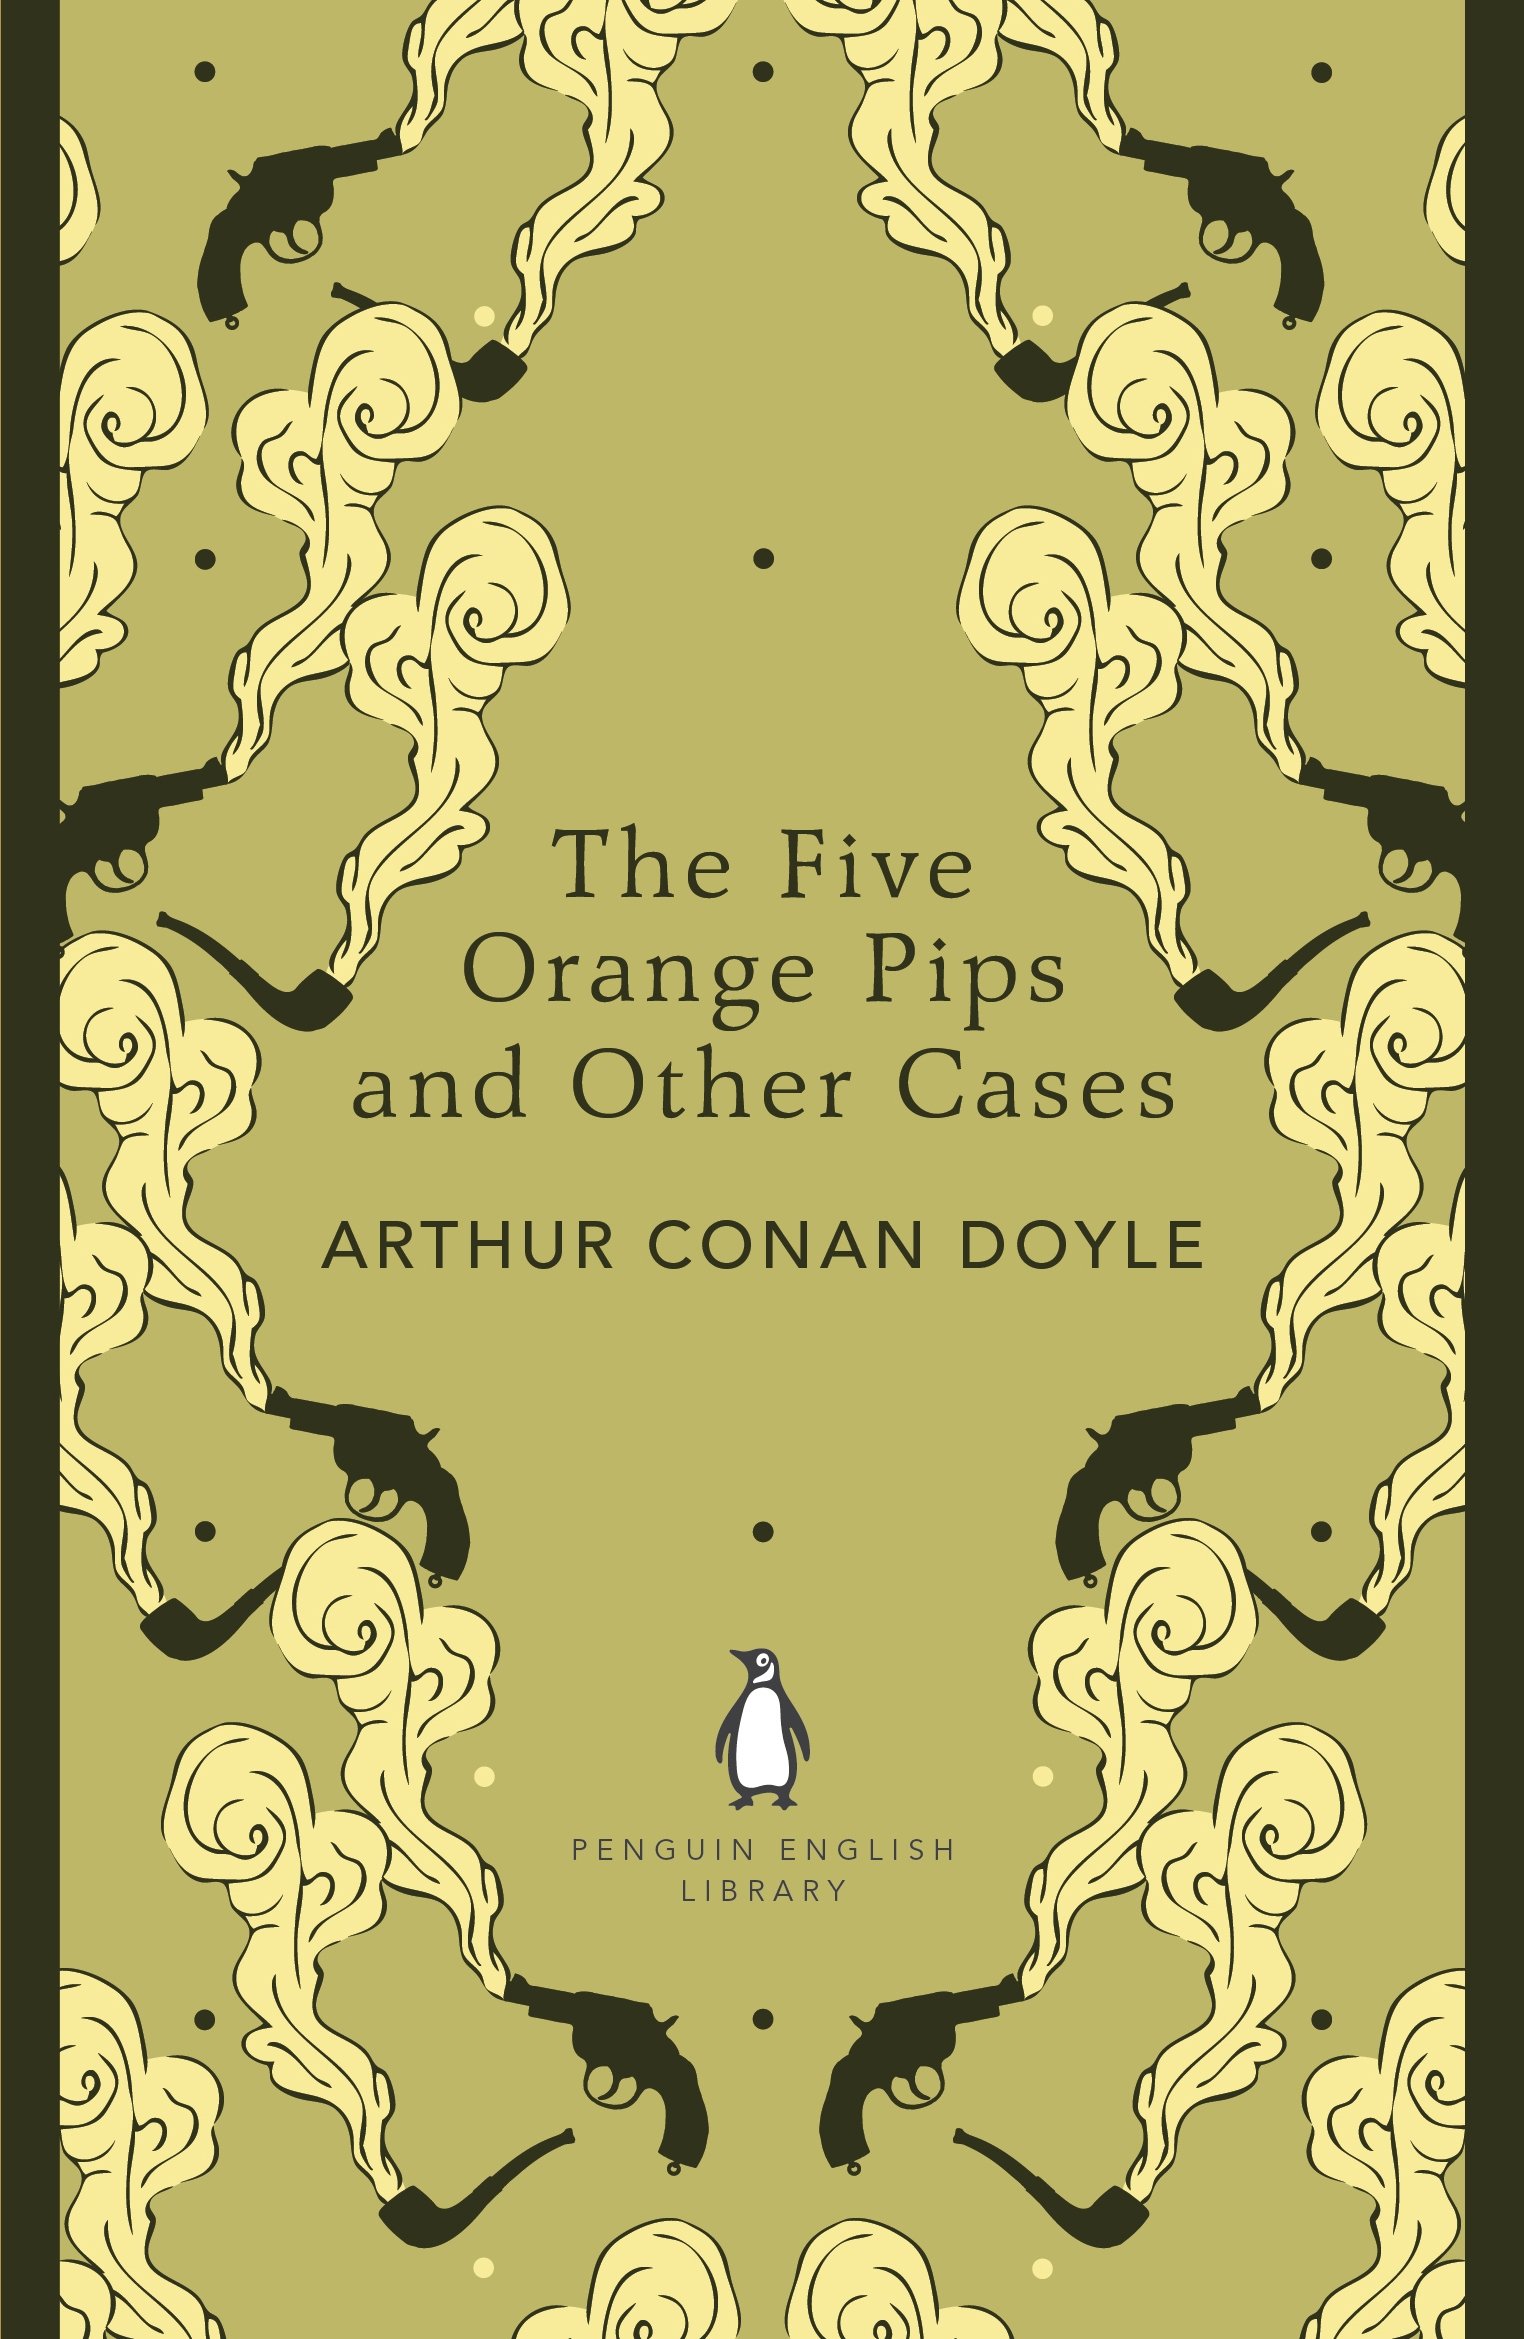 The Five Orange Pips and Other Cases | Sir Arthur Conan Doyle